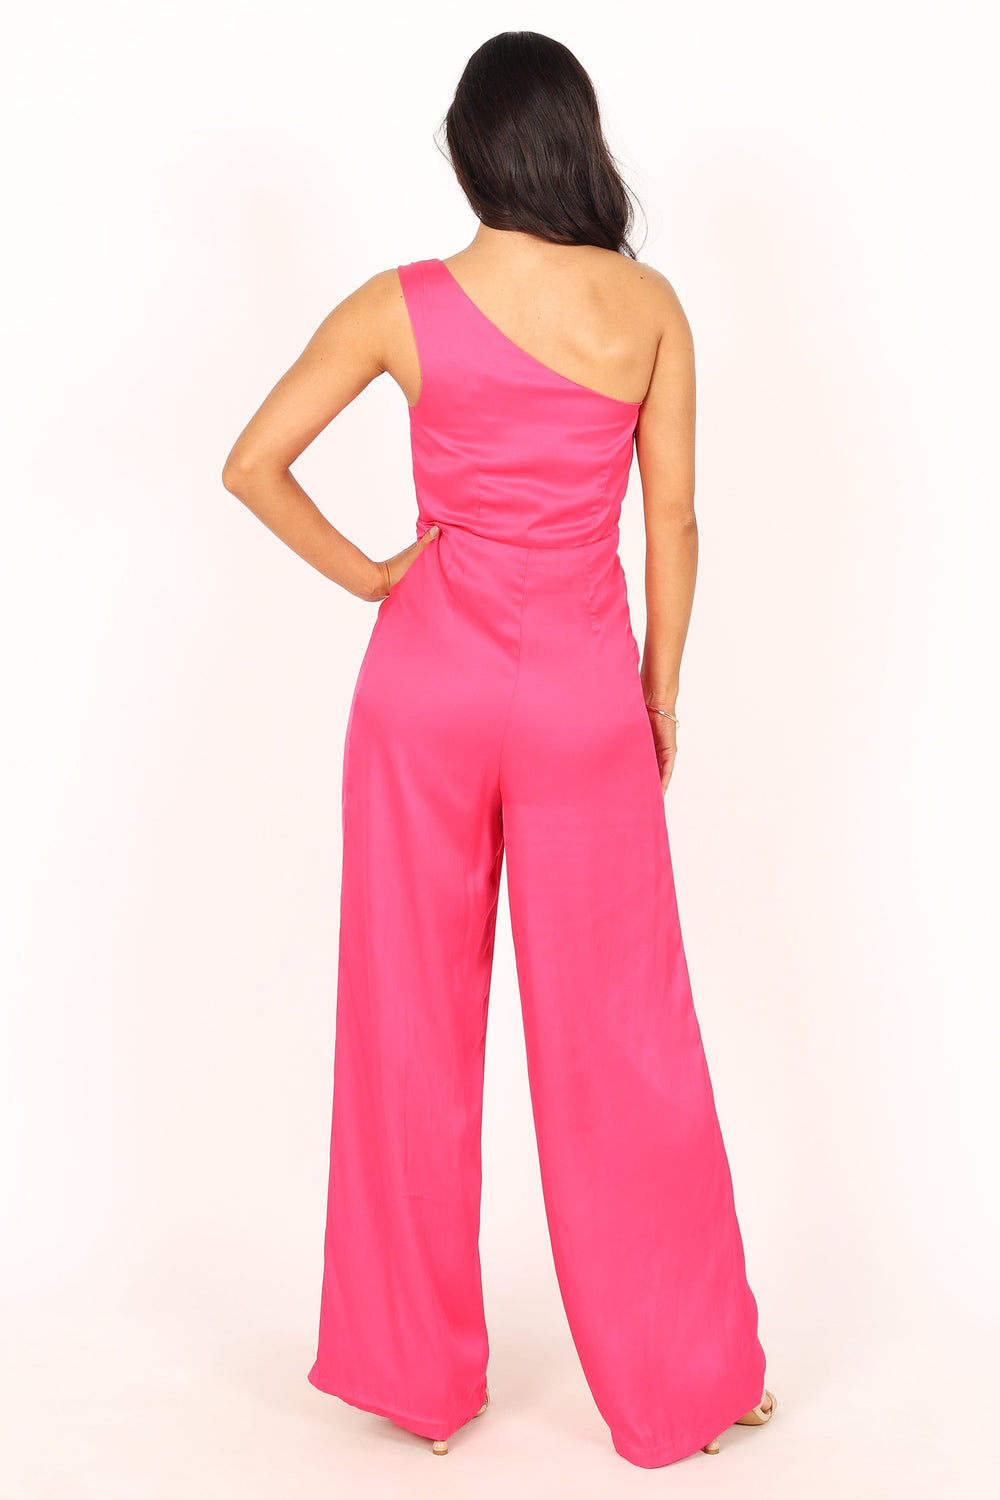 Adrianna Papell One-Shoulder Jumpsuit - Macy's | Pink jumpsuits outfit,  Fashion attire, One shoulder jumpsuit